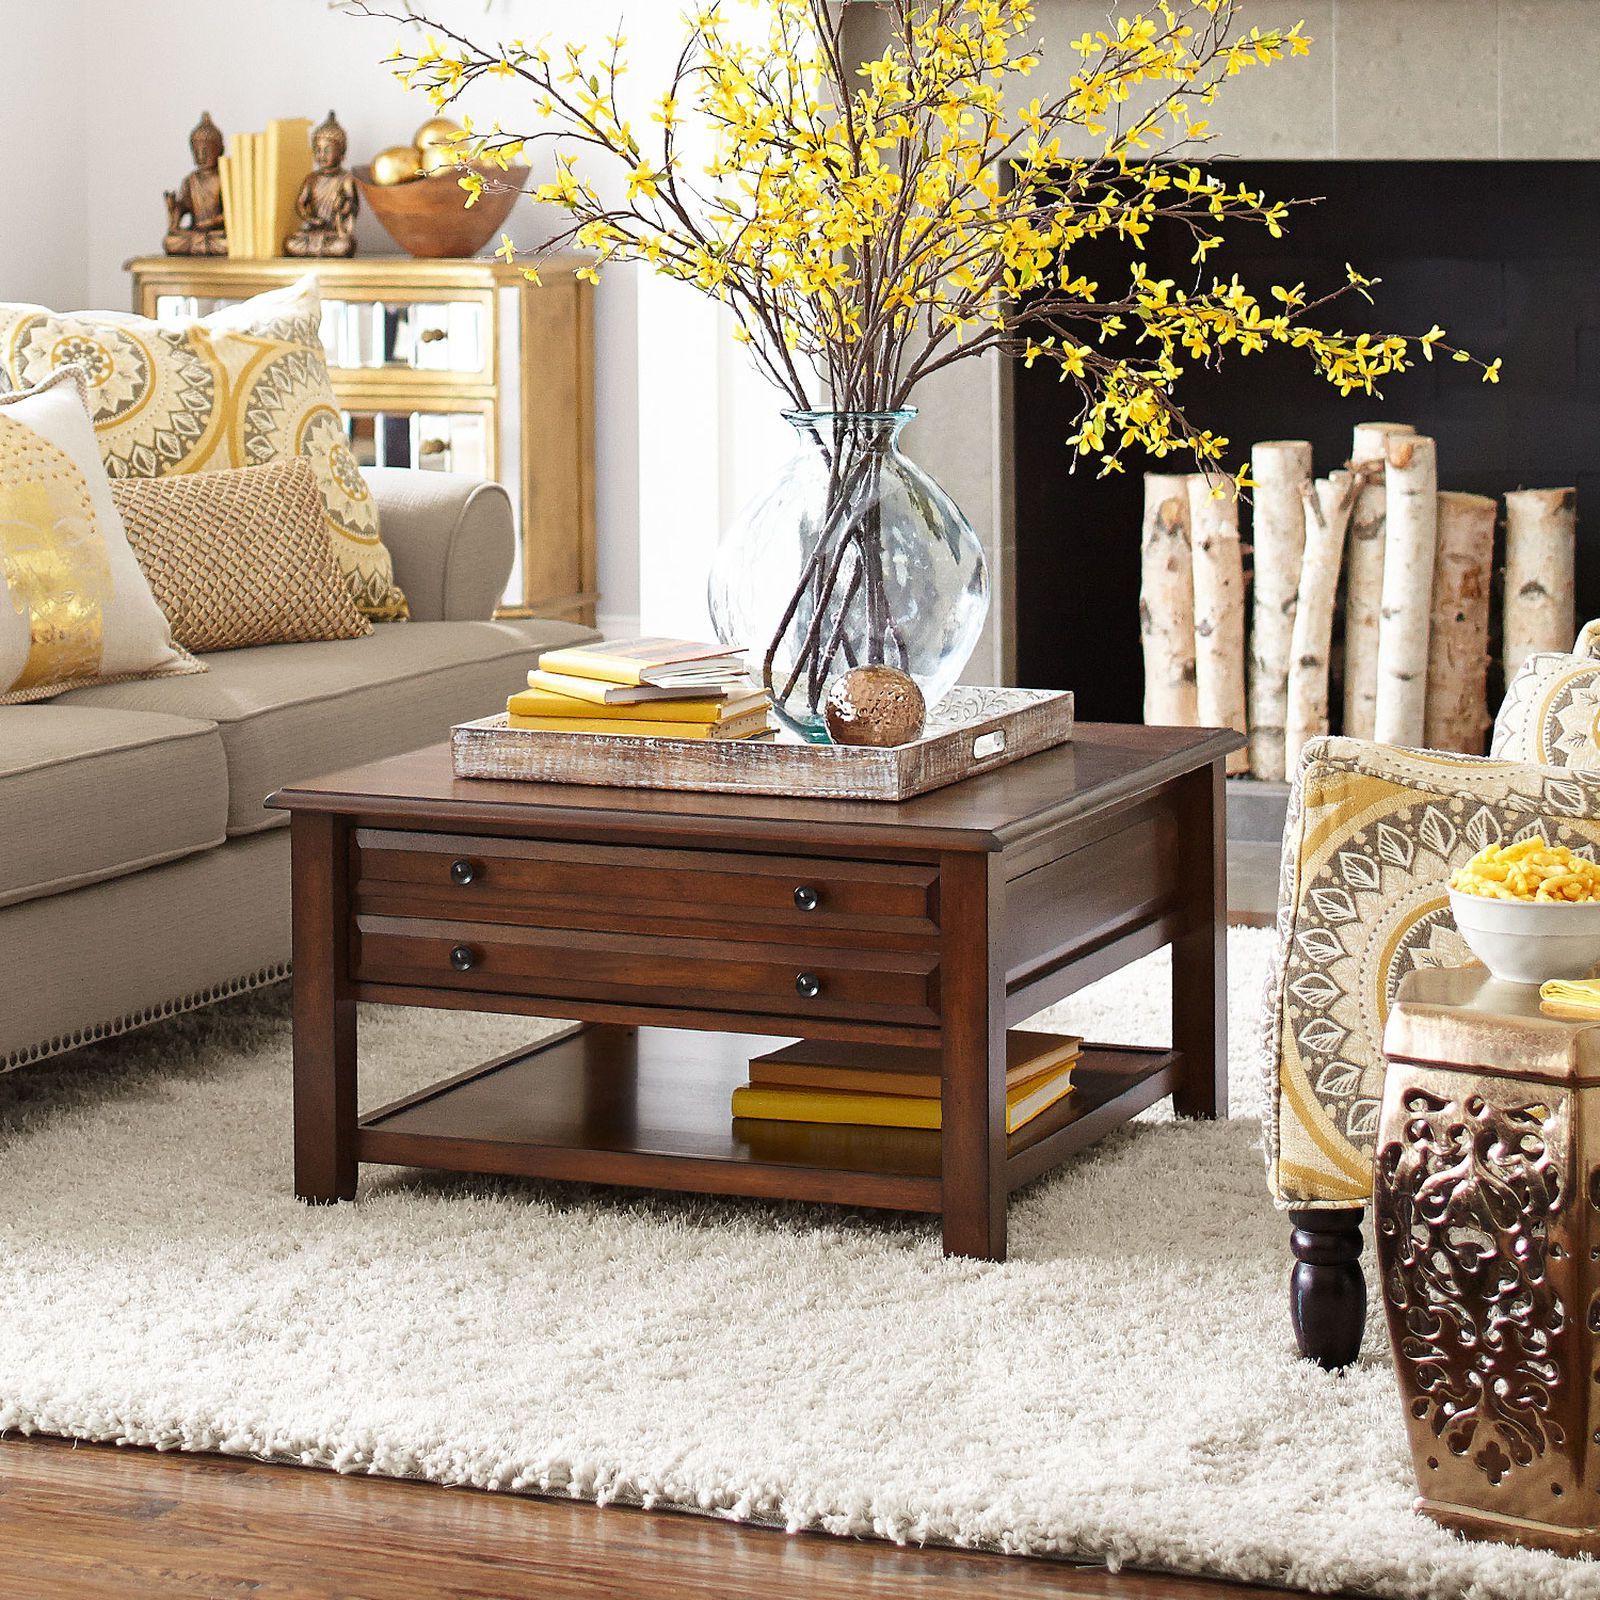 How To Decorate Your Square Coffee Table With Style – Coffee Table Decor Regarding Recent Transitional Square Coffee Tables (View 7 of 15)